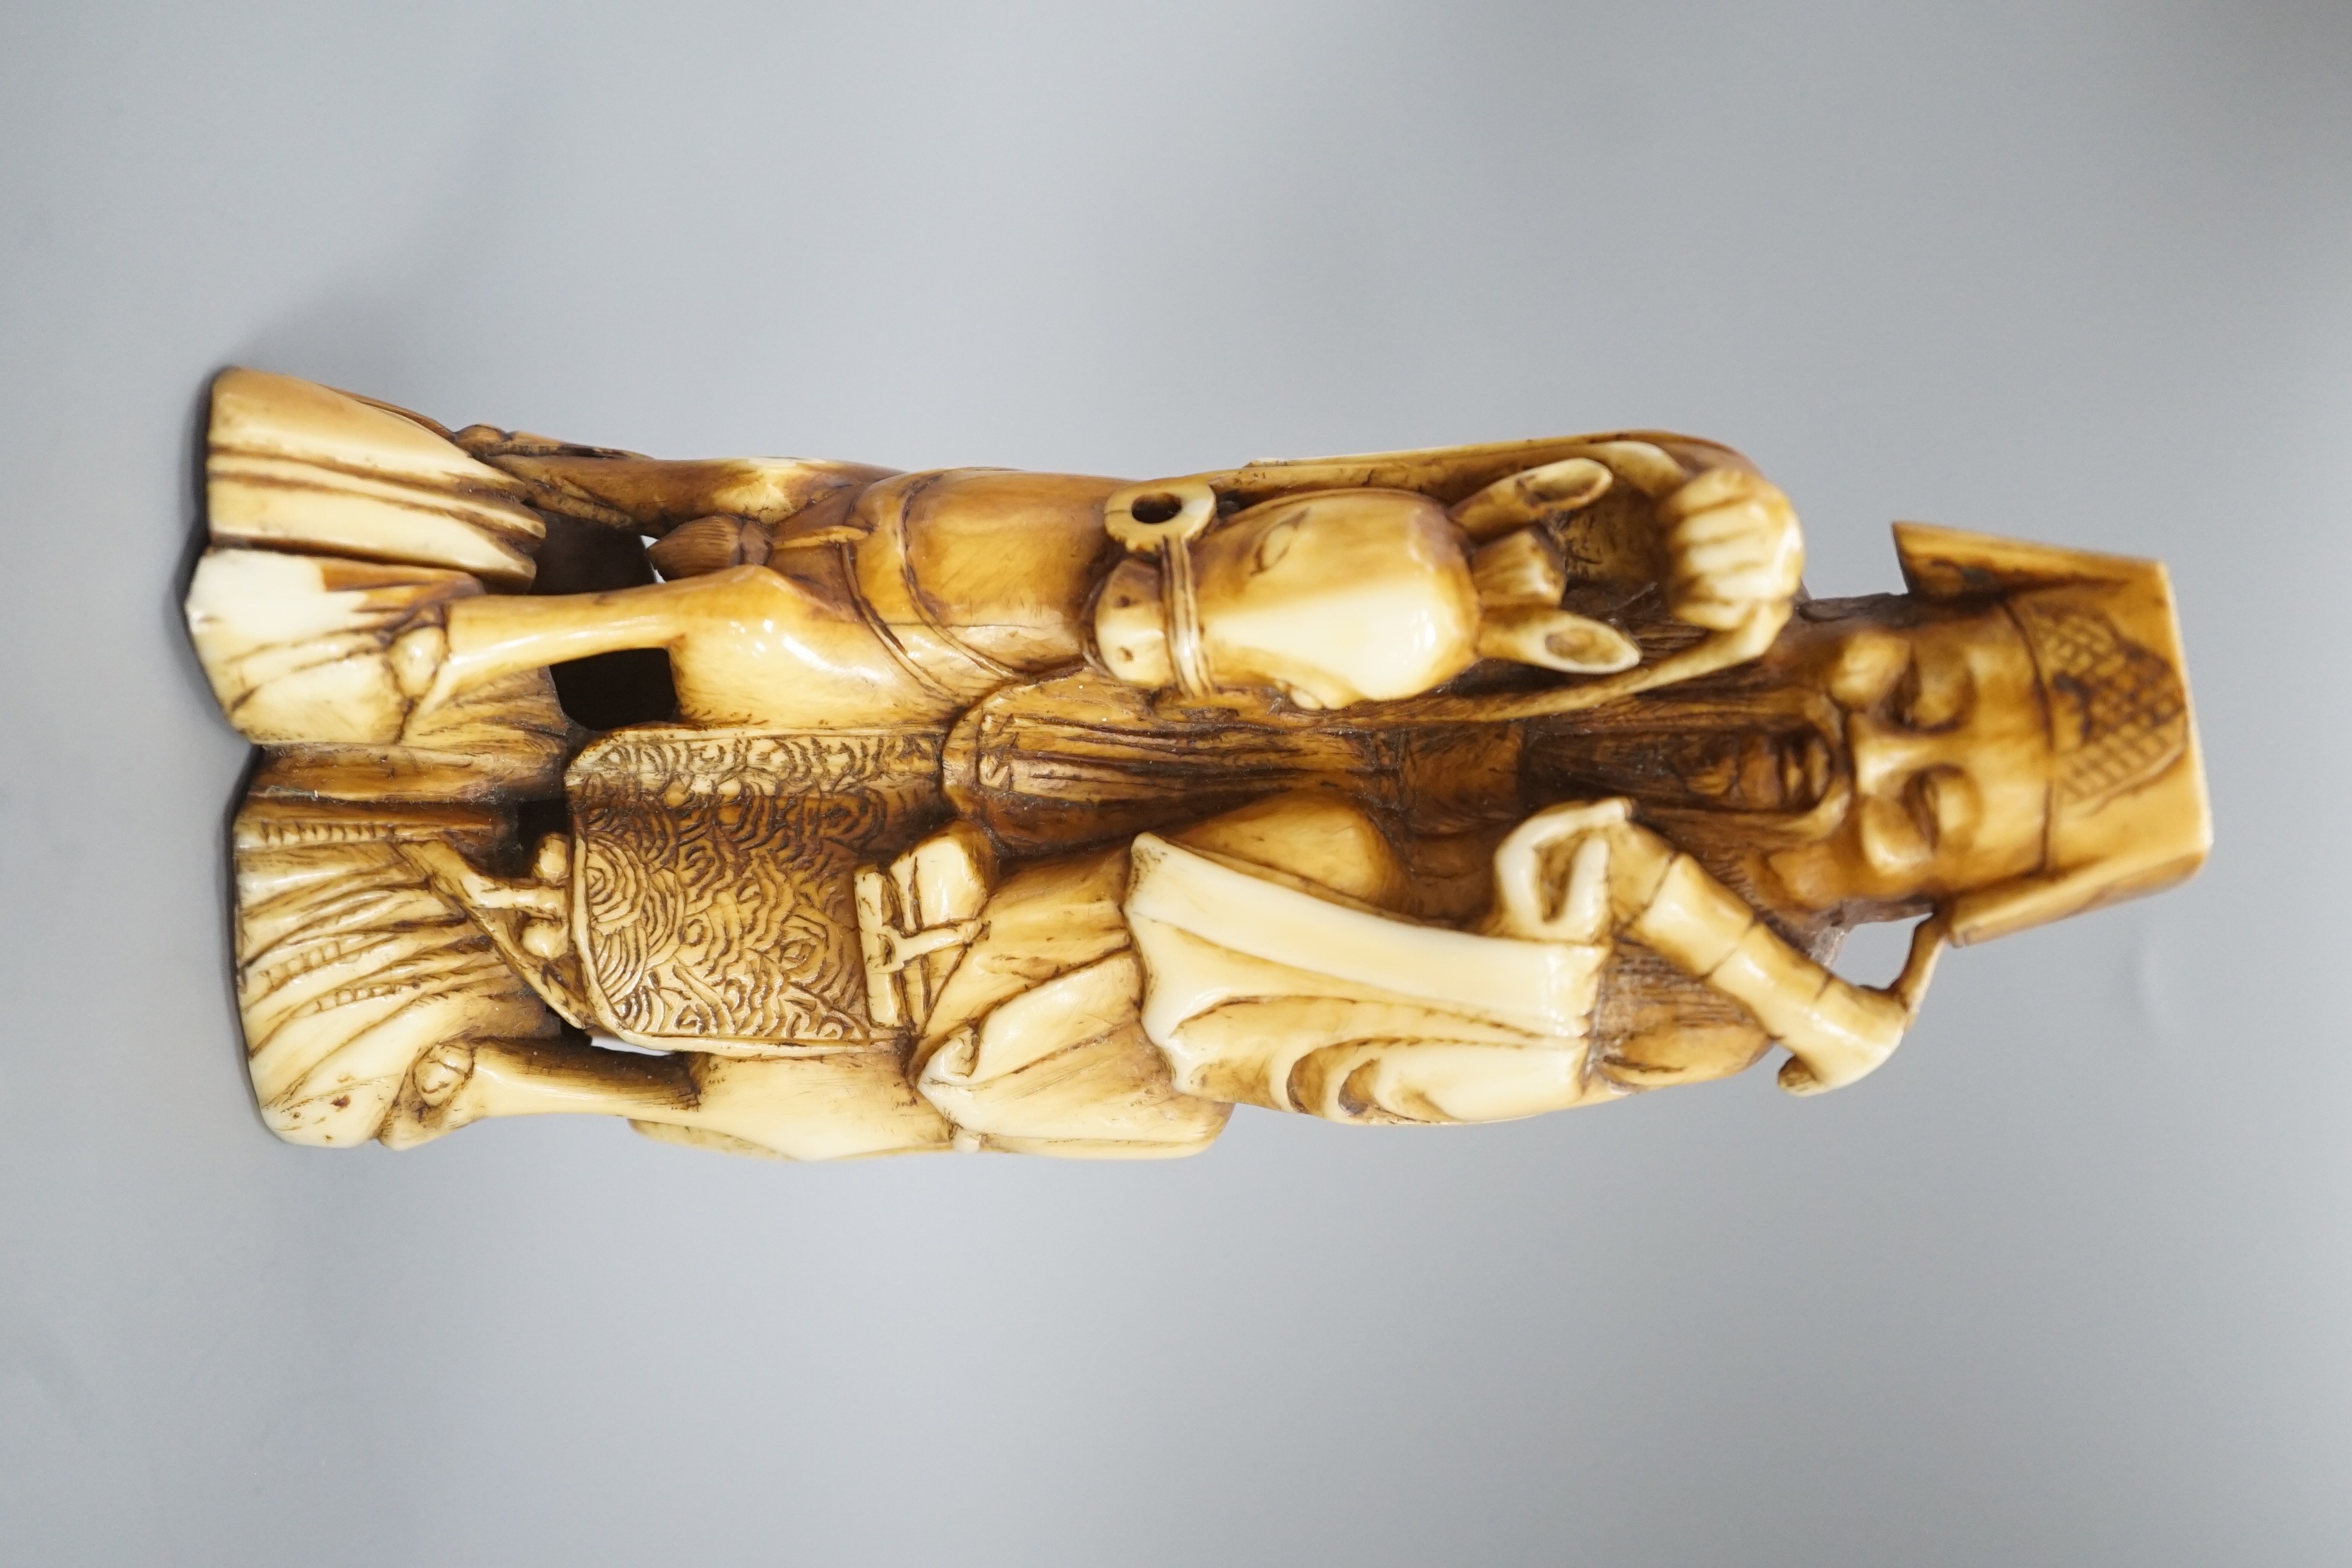 A Chinese hippopotamus ivory group of Zhang Guolao riding a horse, 19th century 14cm